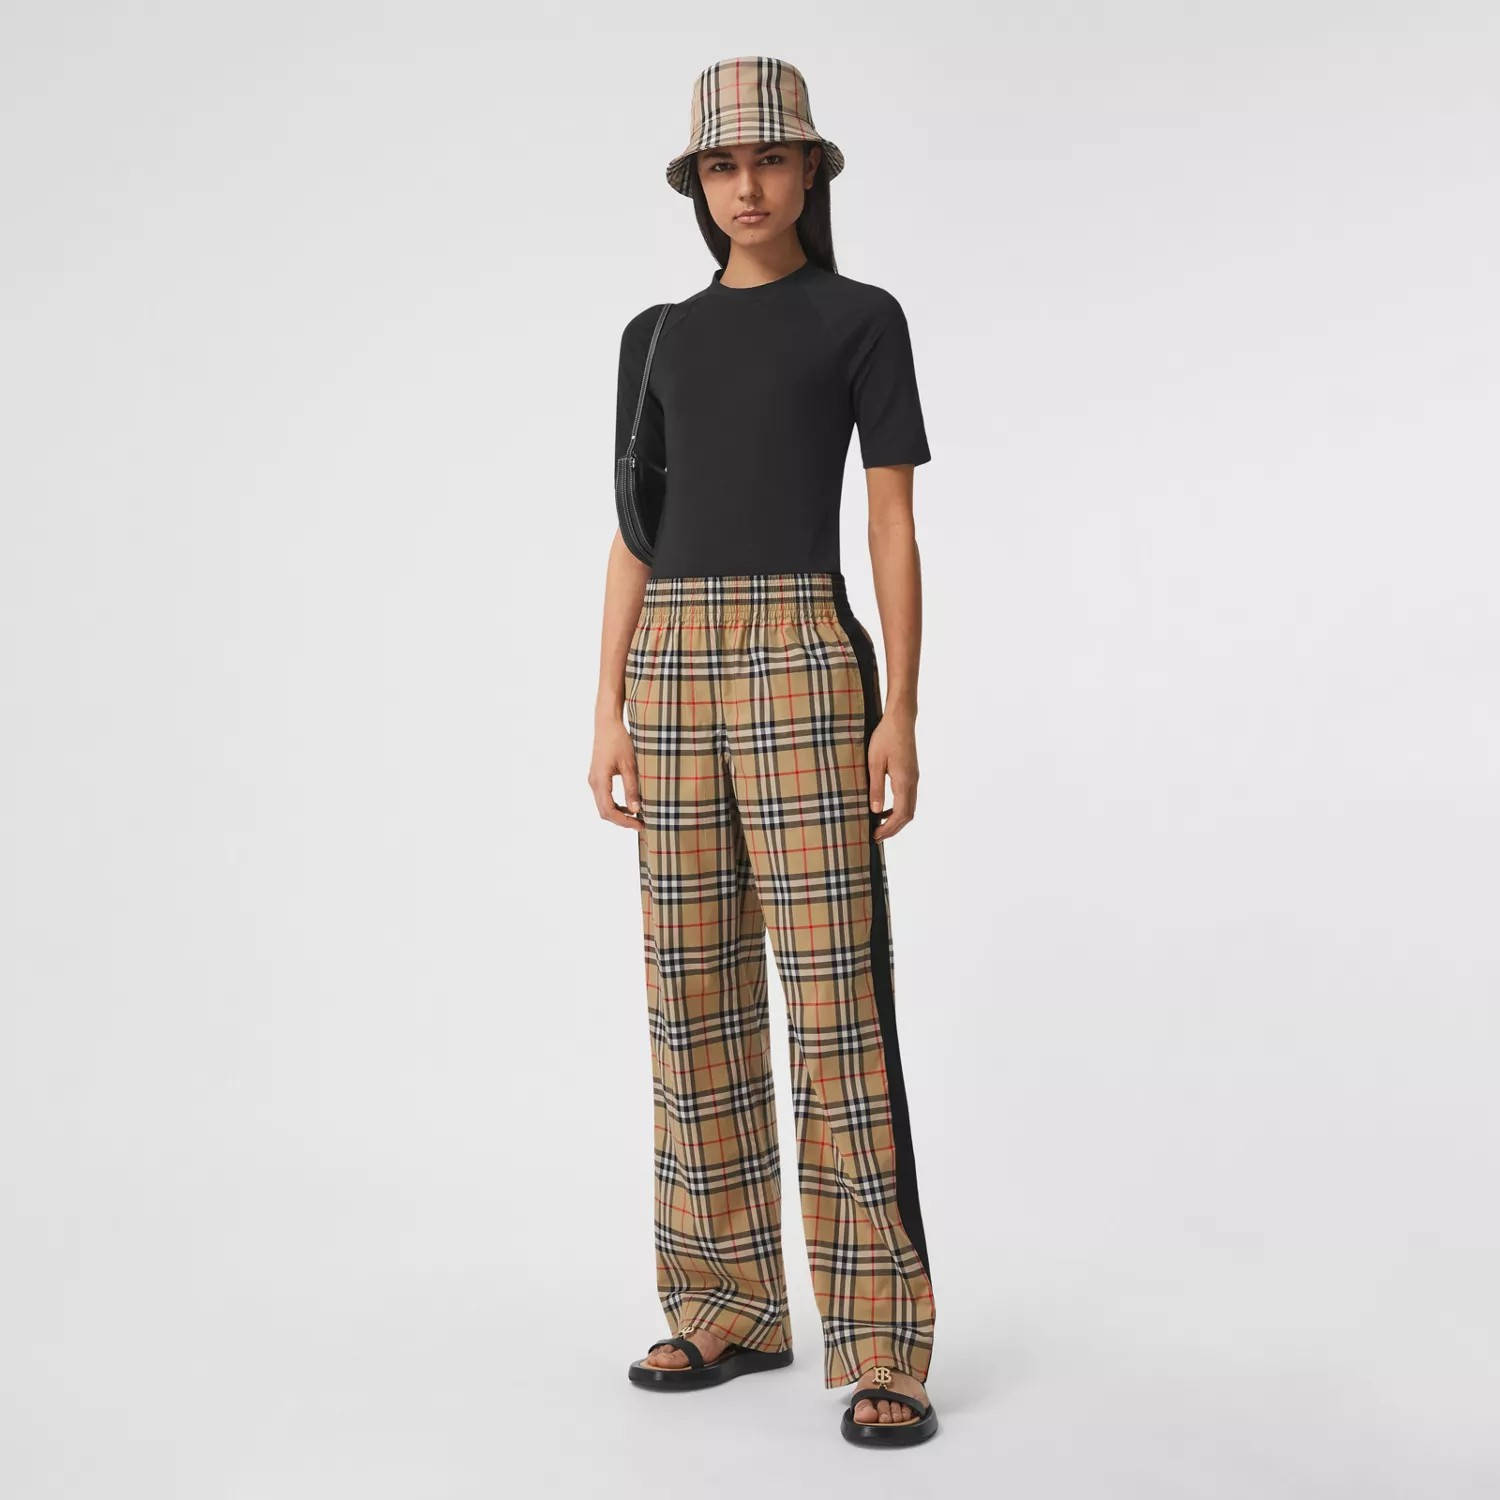 kiko.vintage on Instagram: “Vintage Burberry high waisted trousers  available for purchase now in size XS. $228 … | Vintage burberry, High  waisted trousers, Fashion